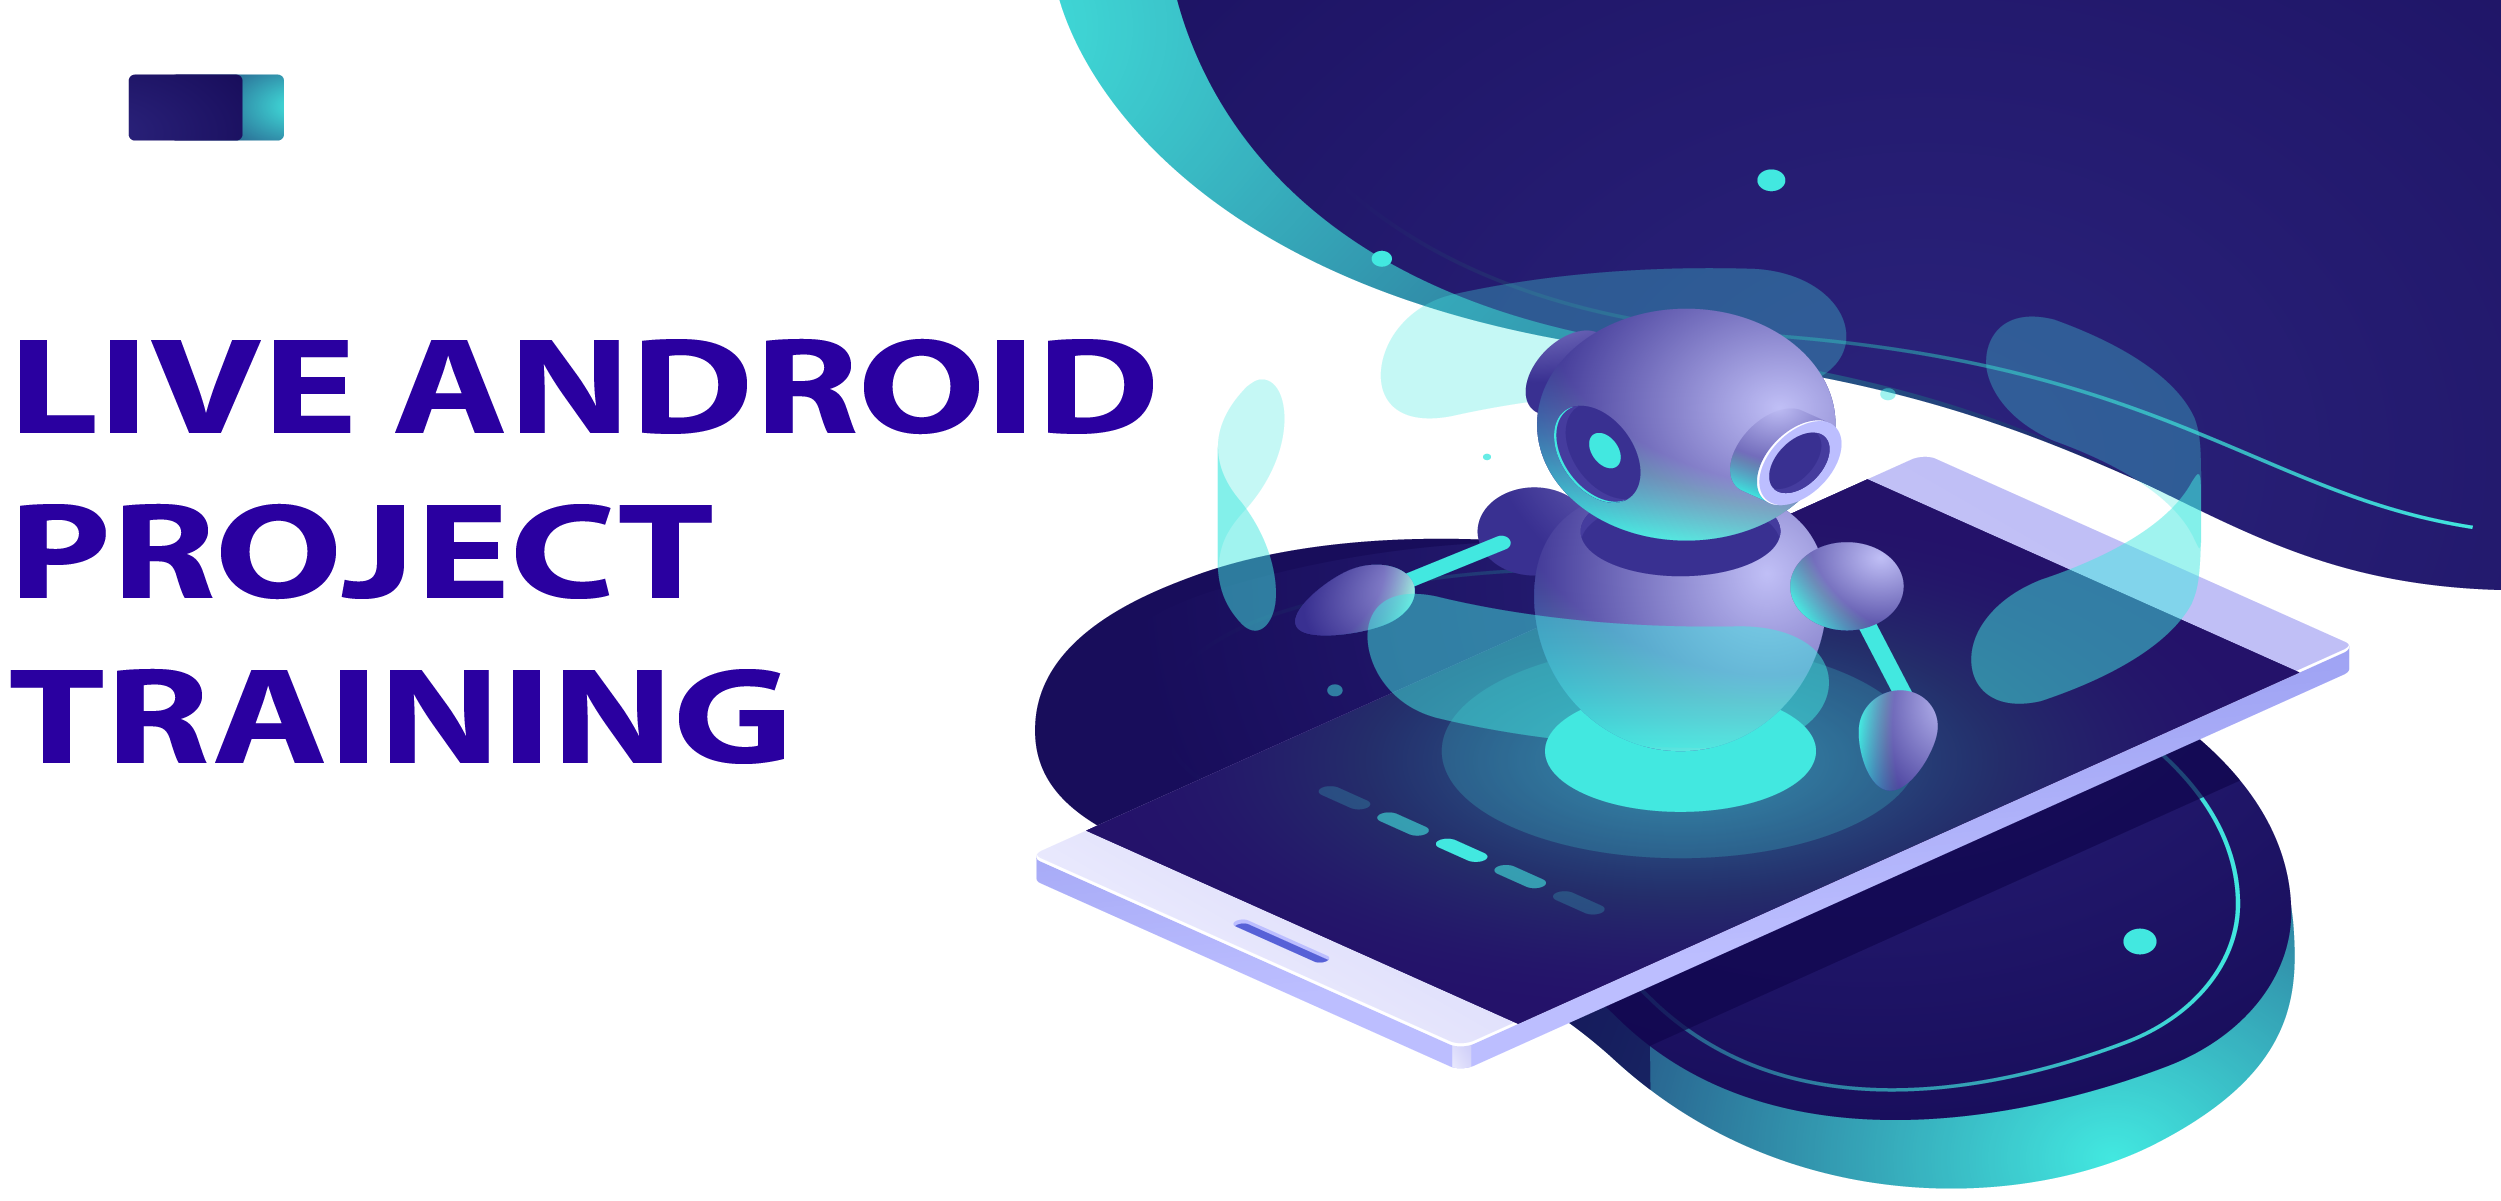 Live Android Project Training